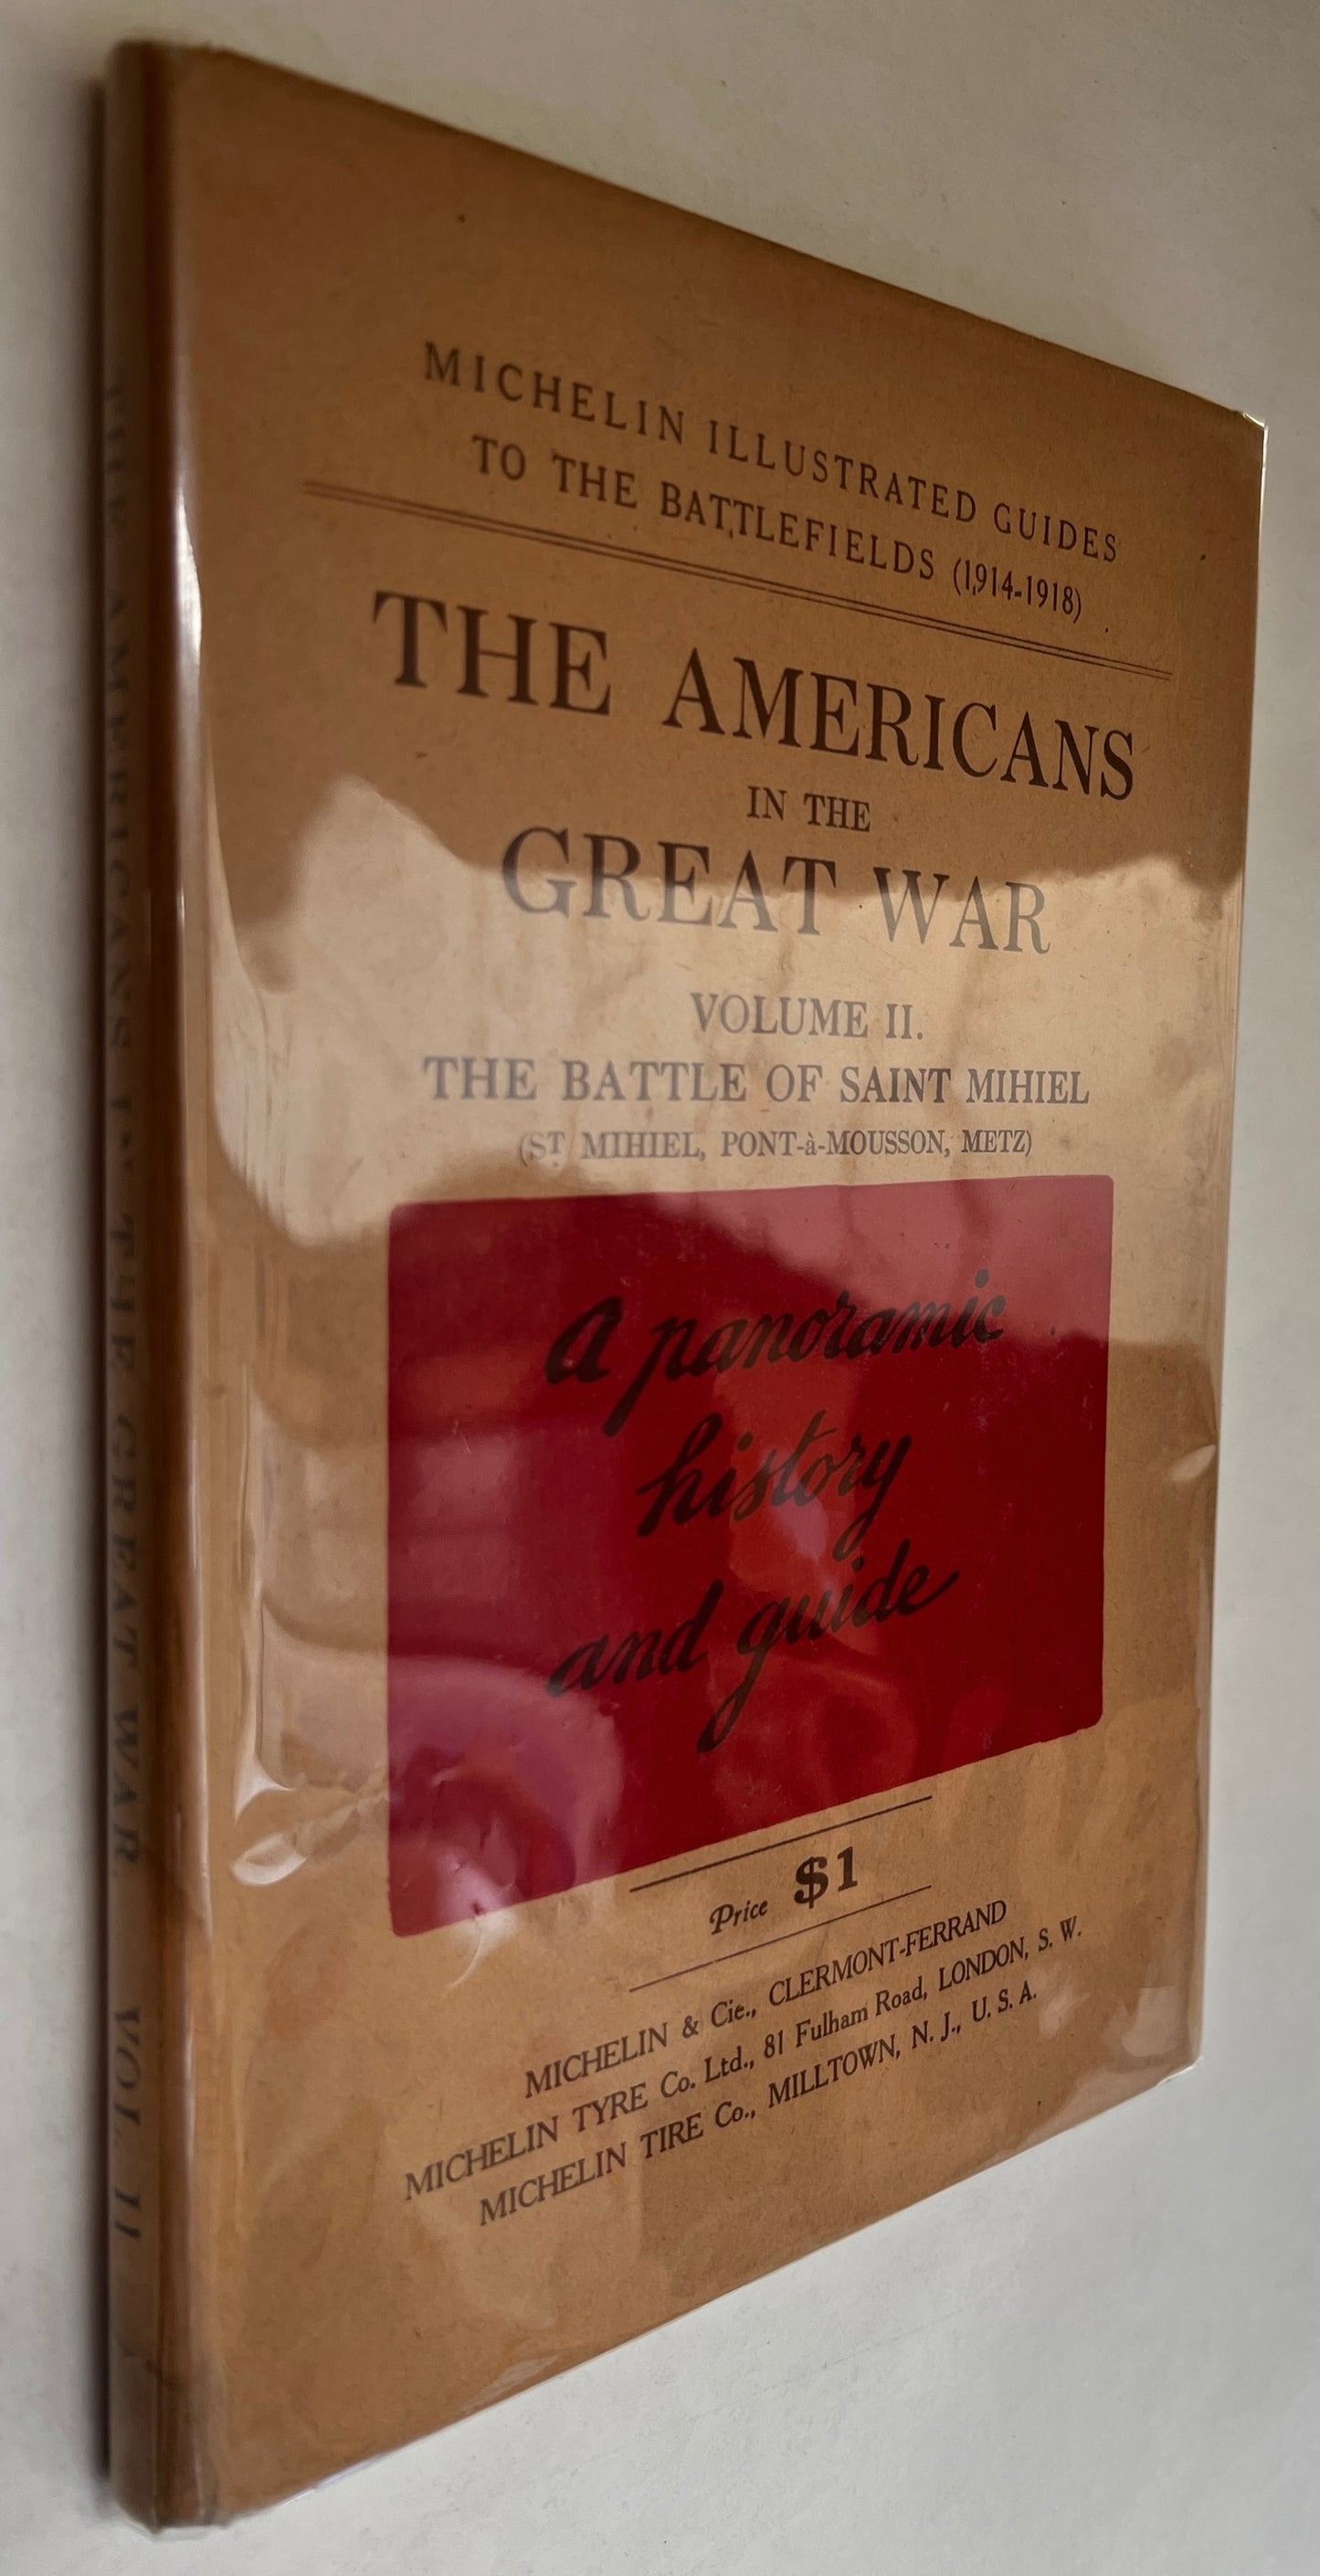 The Americans in the Great War. Volume II. the Battle of Saint Mihiel (St. Mihiel, Pont-A-Mousson, Metz)